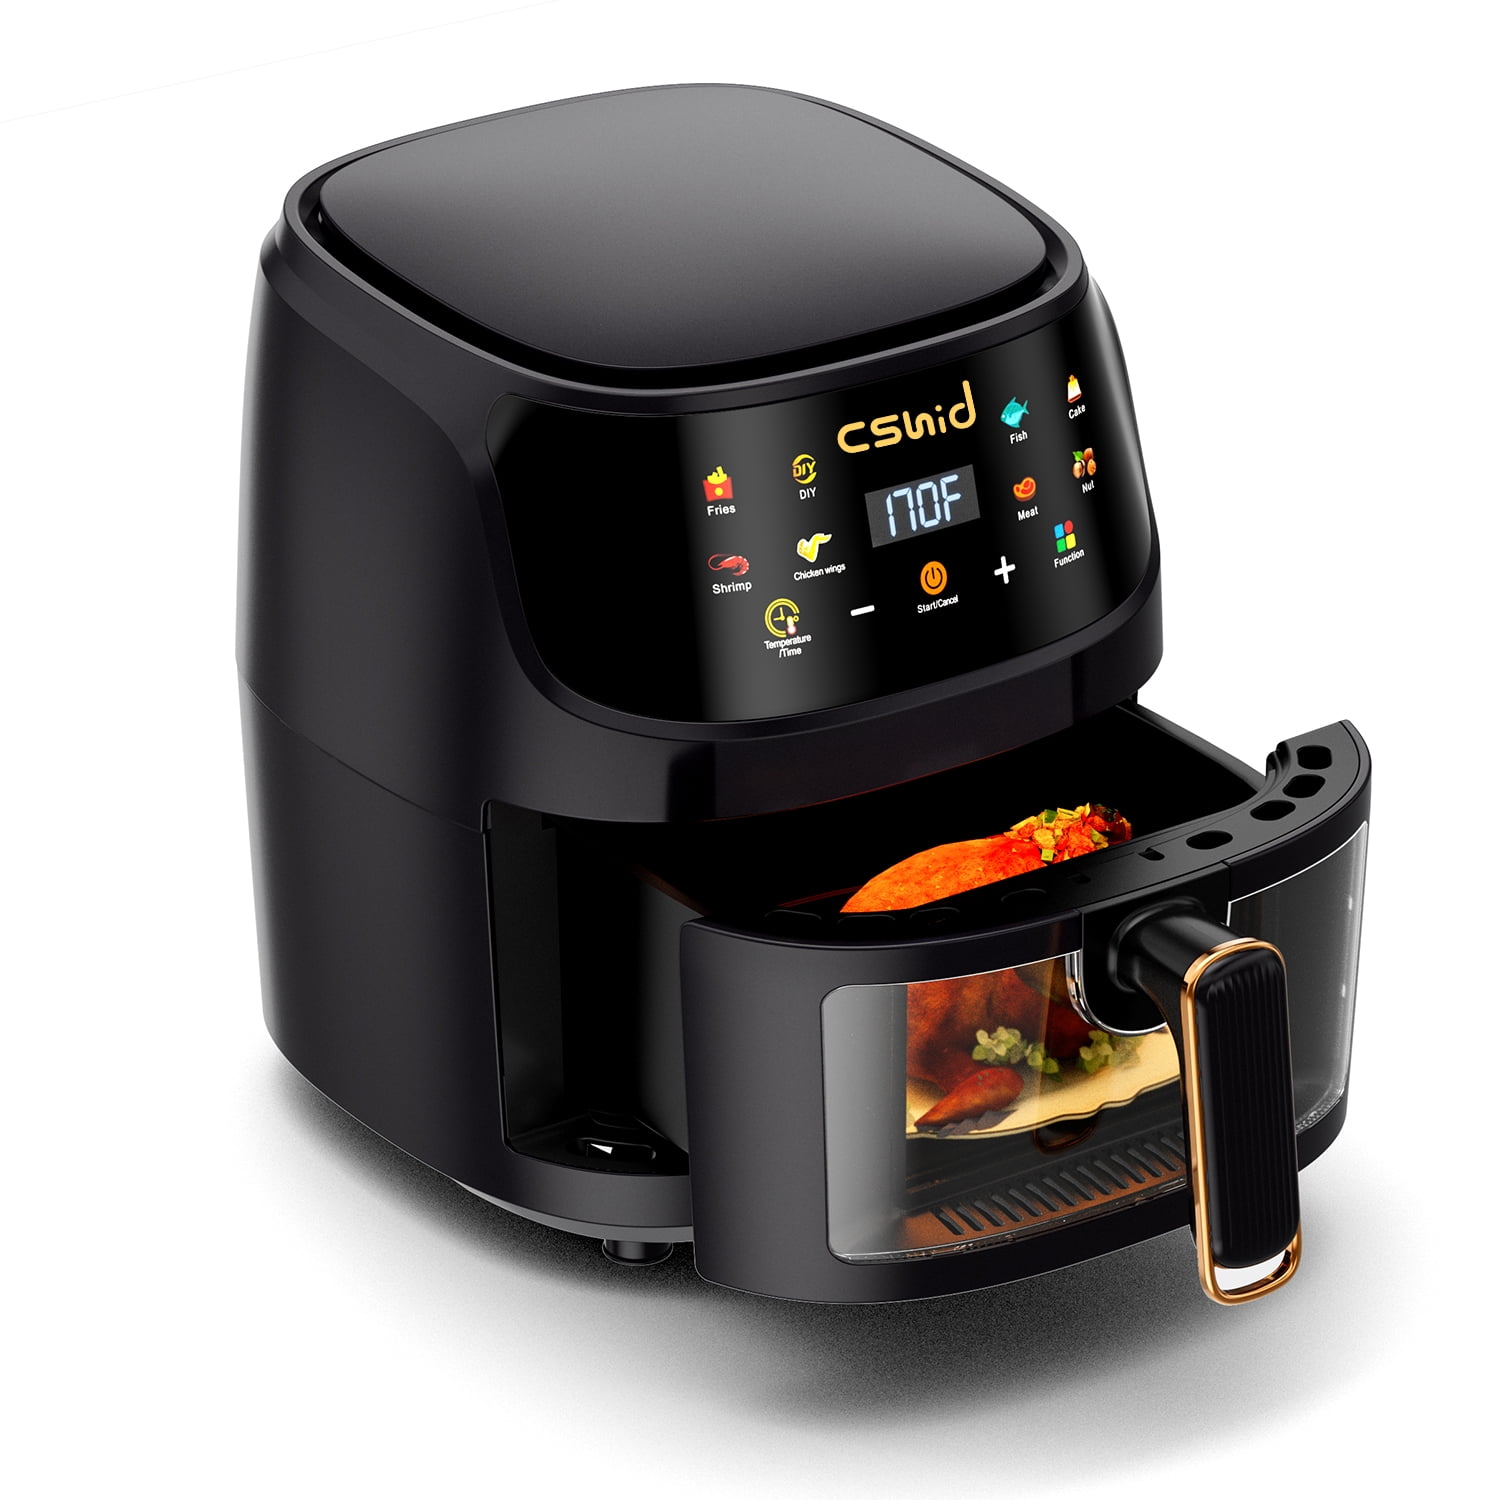 Xiaomi Smart Air Fryer for 4-5 People, 90% Less Fat l 1500W Fast Cooking, 7 Pre-set Menus, Grill, Bake, Fry, Roast, Reheat, Defrost, 40-200°C l  Dual Speed Technology, Voice Control